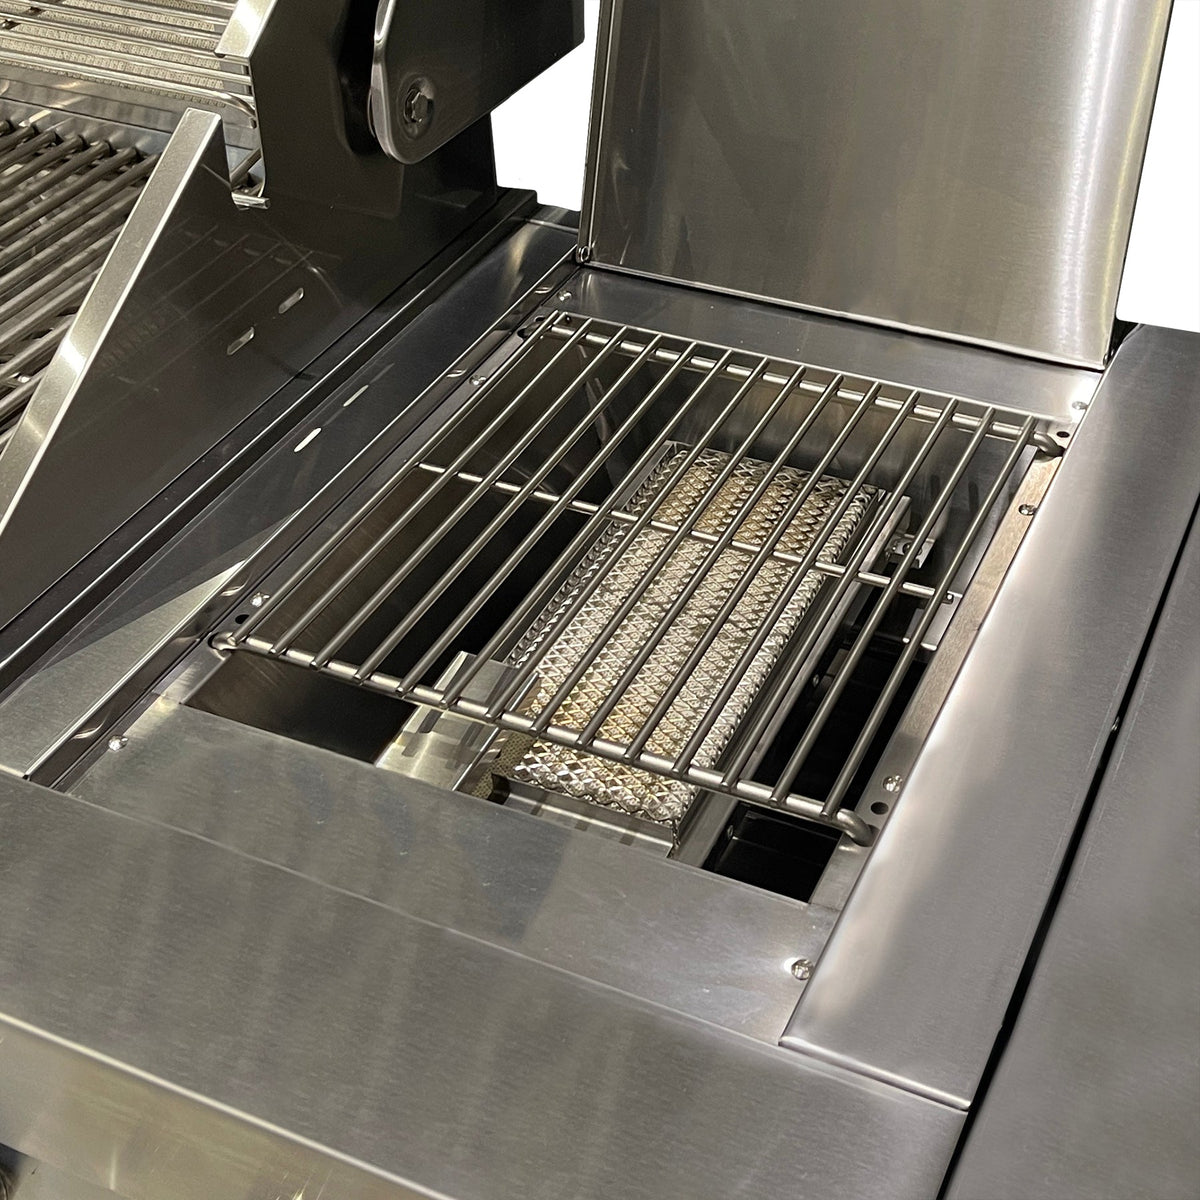 Draco Grills Z650 Deluxe 6 Burner Stainless Steel Barbecue with Integrated Sear Station